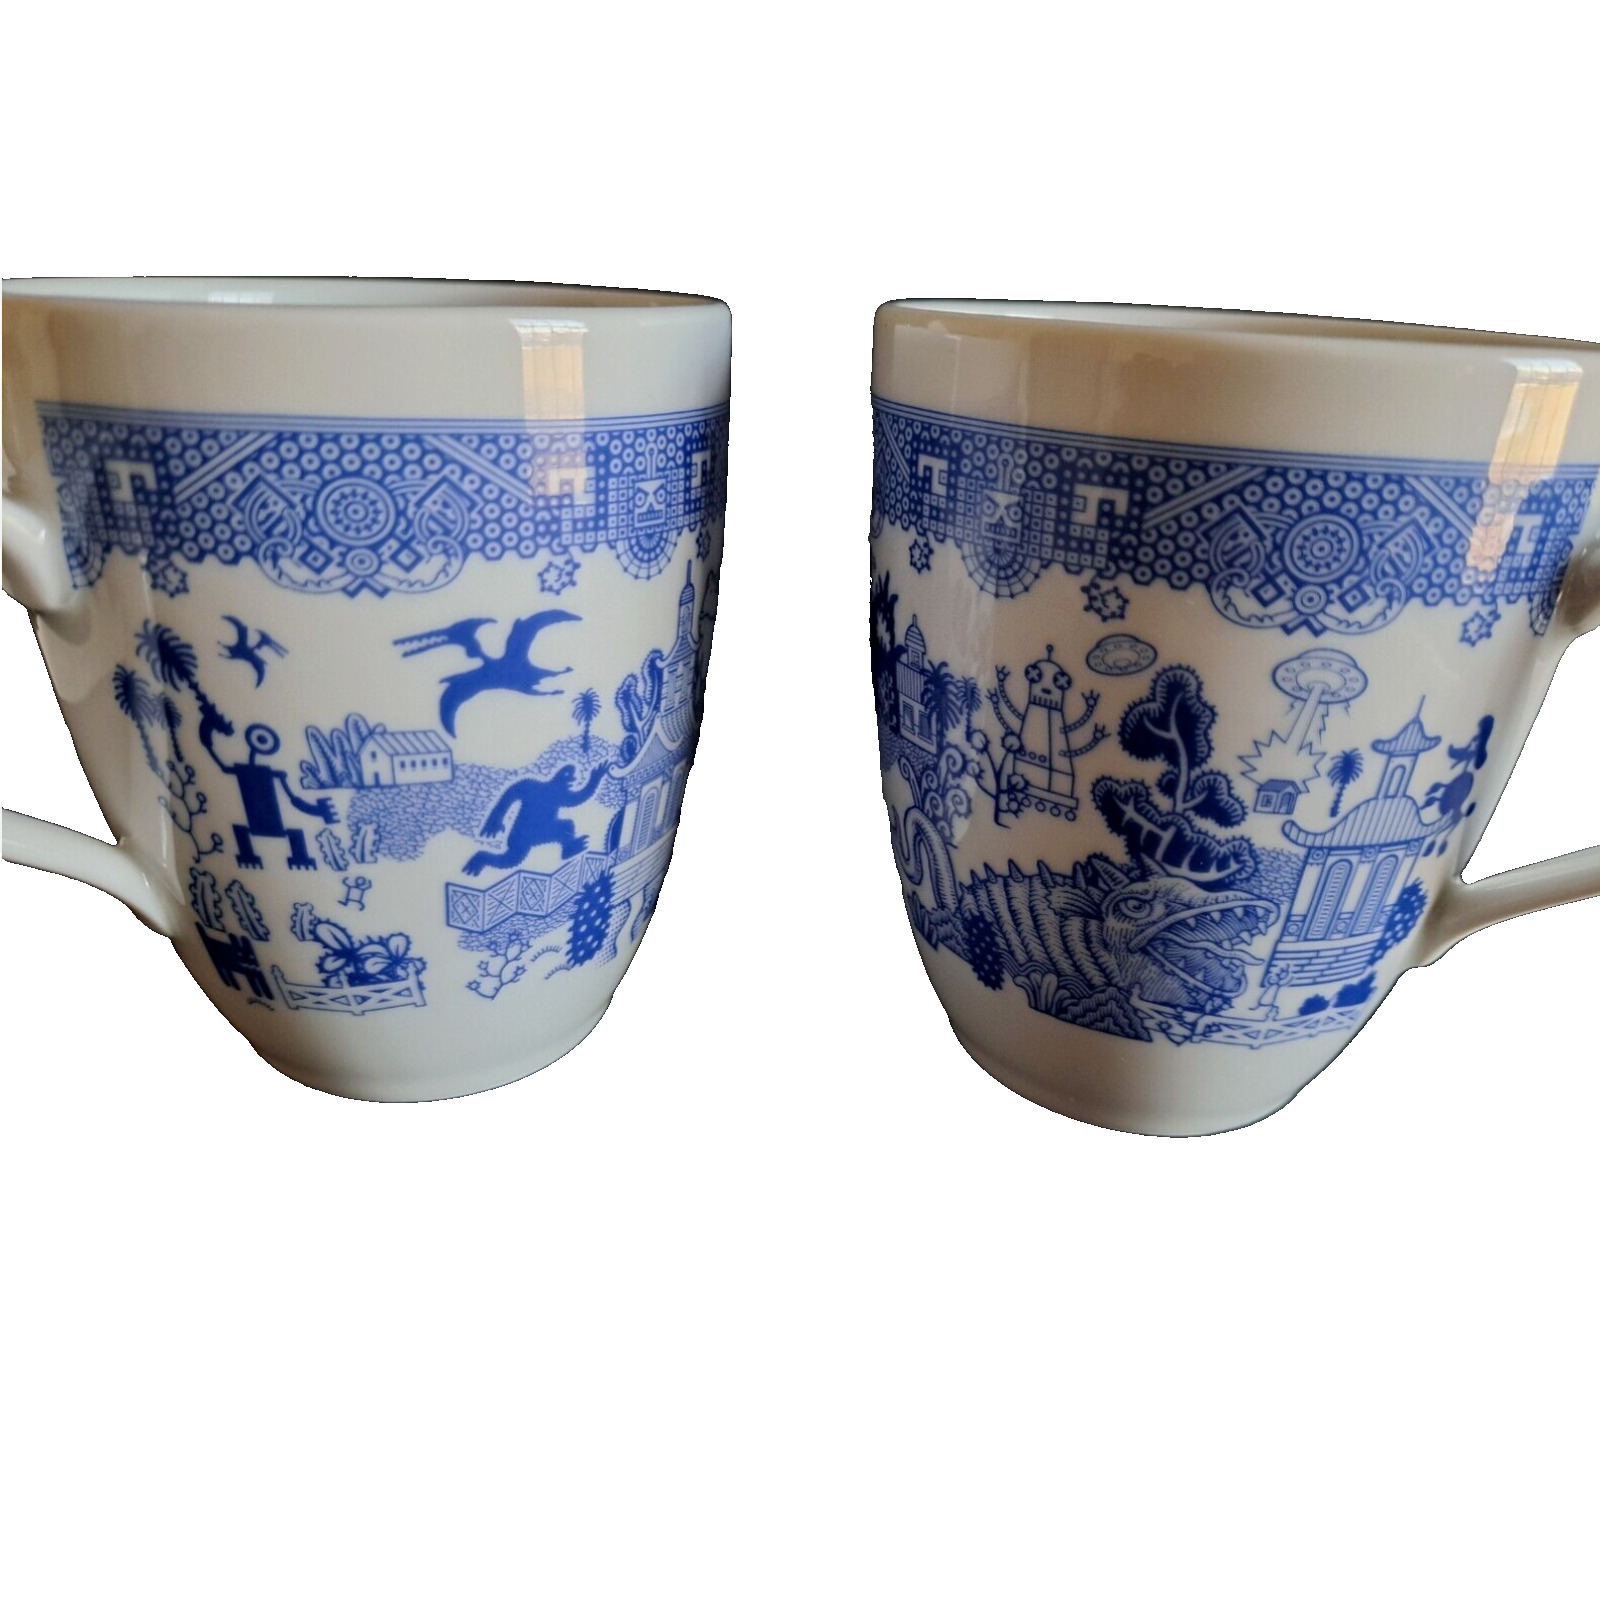 Calamityware Don Moyer Design Things Could Be Worse 2 Blue White Mugs Poland